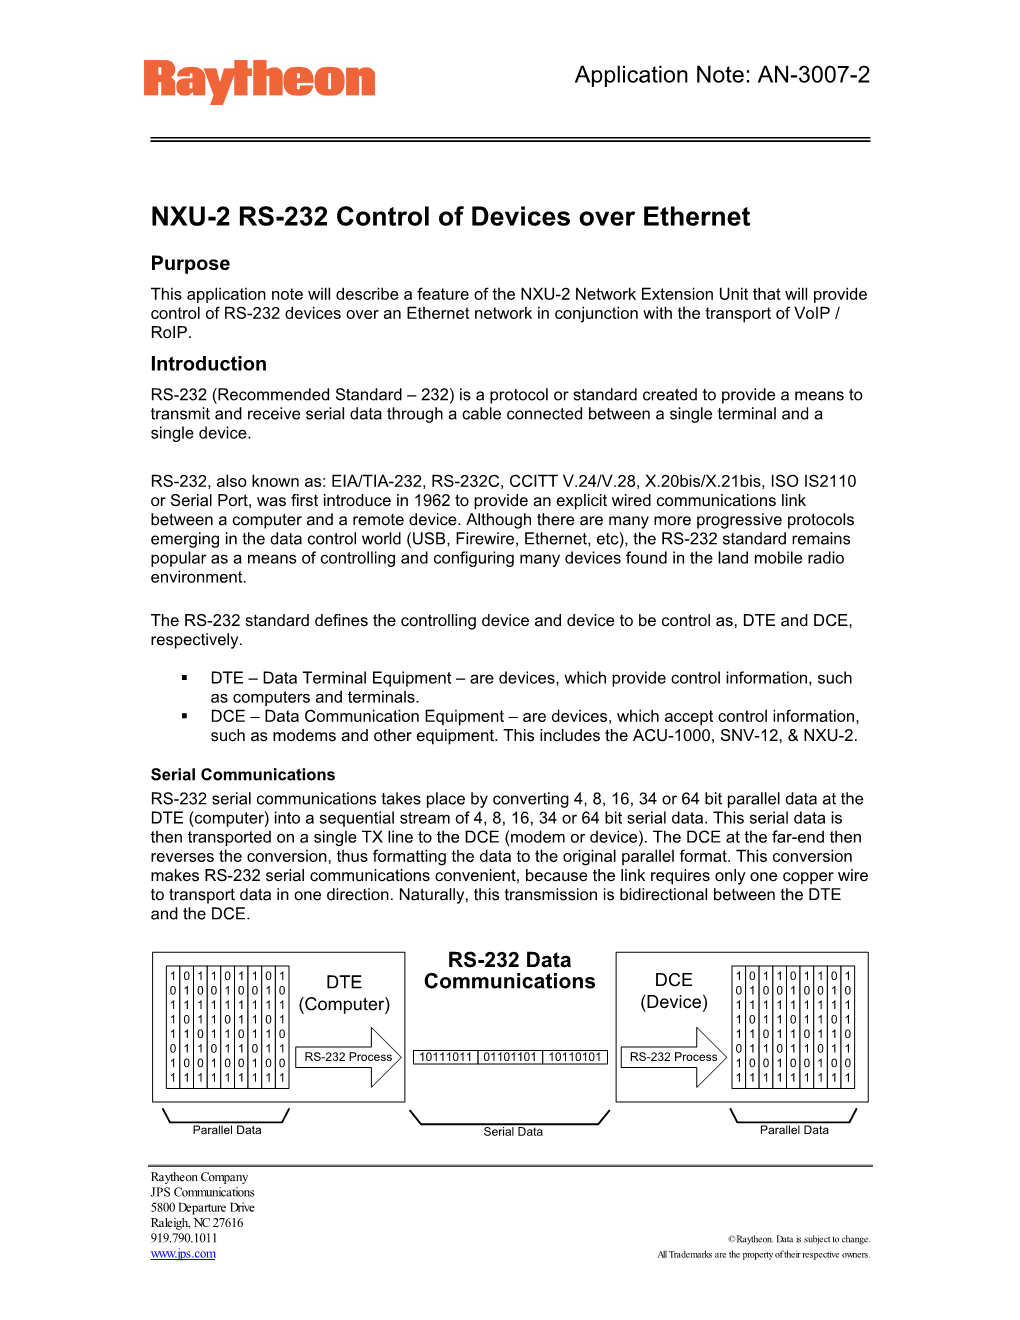 NXU-2 RS-232 Control of Devices Over Ethernet